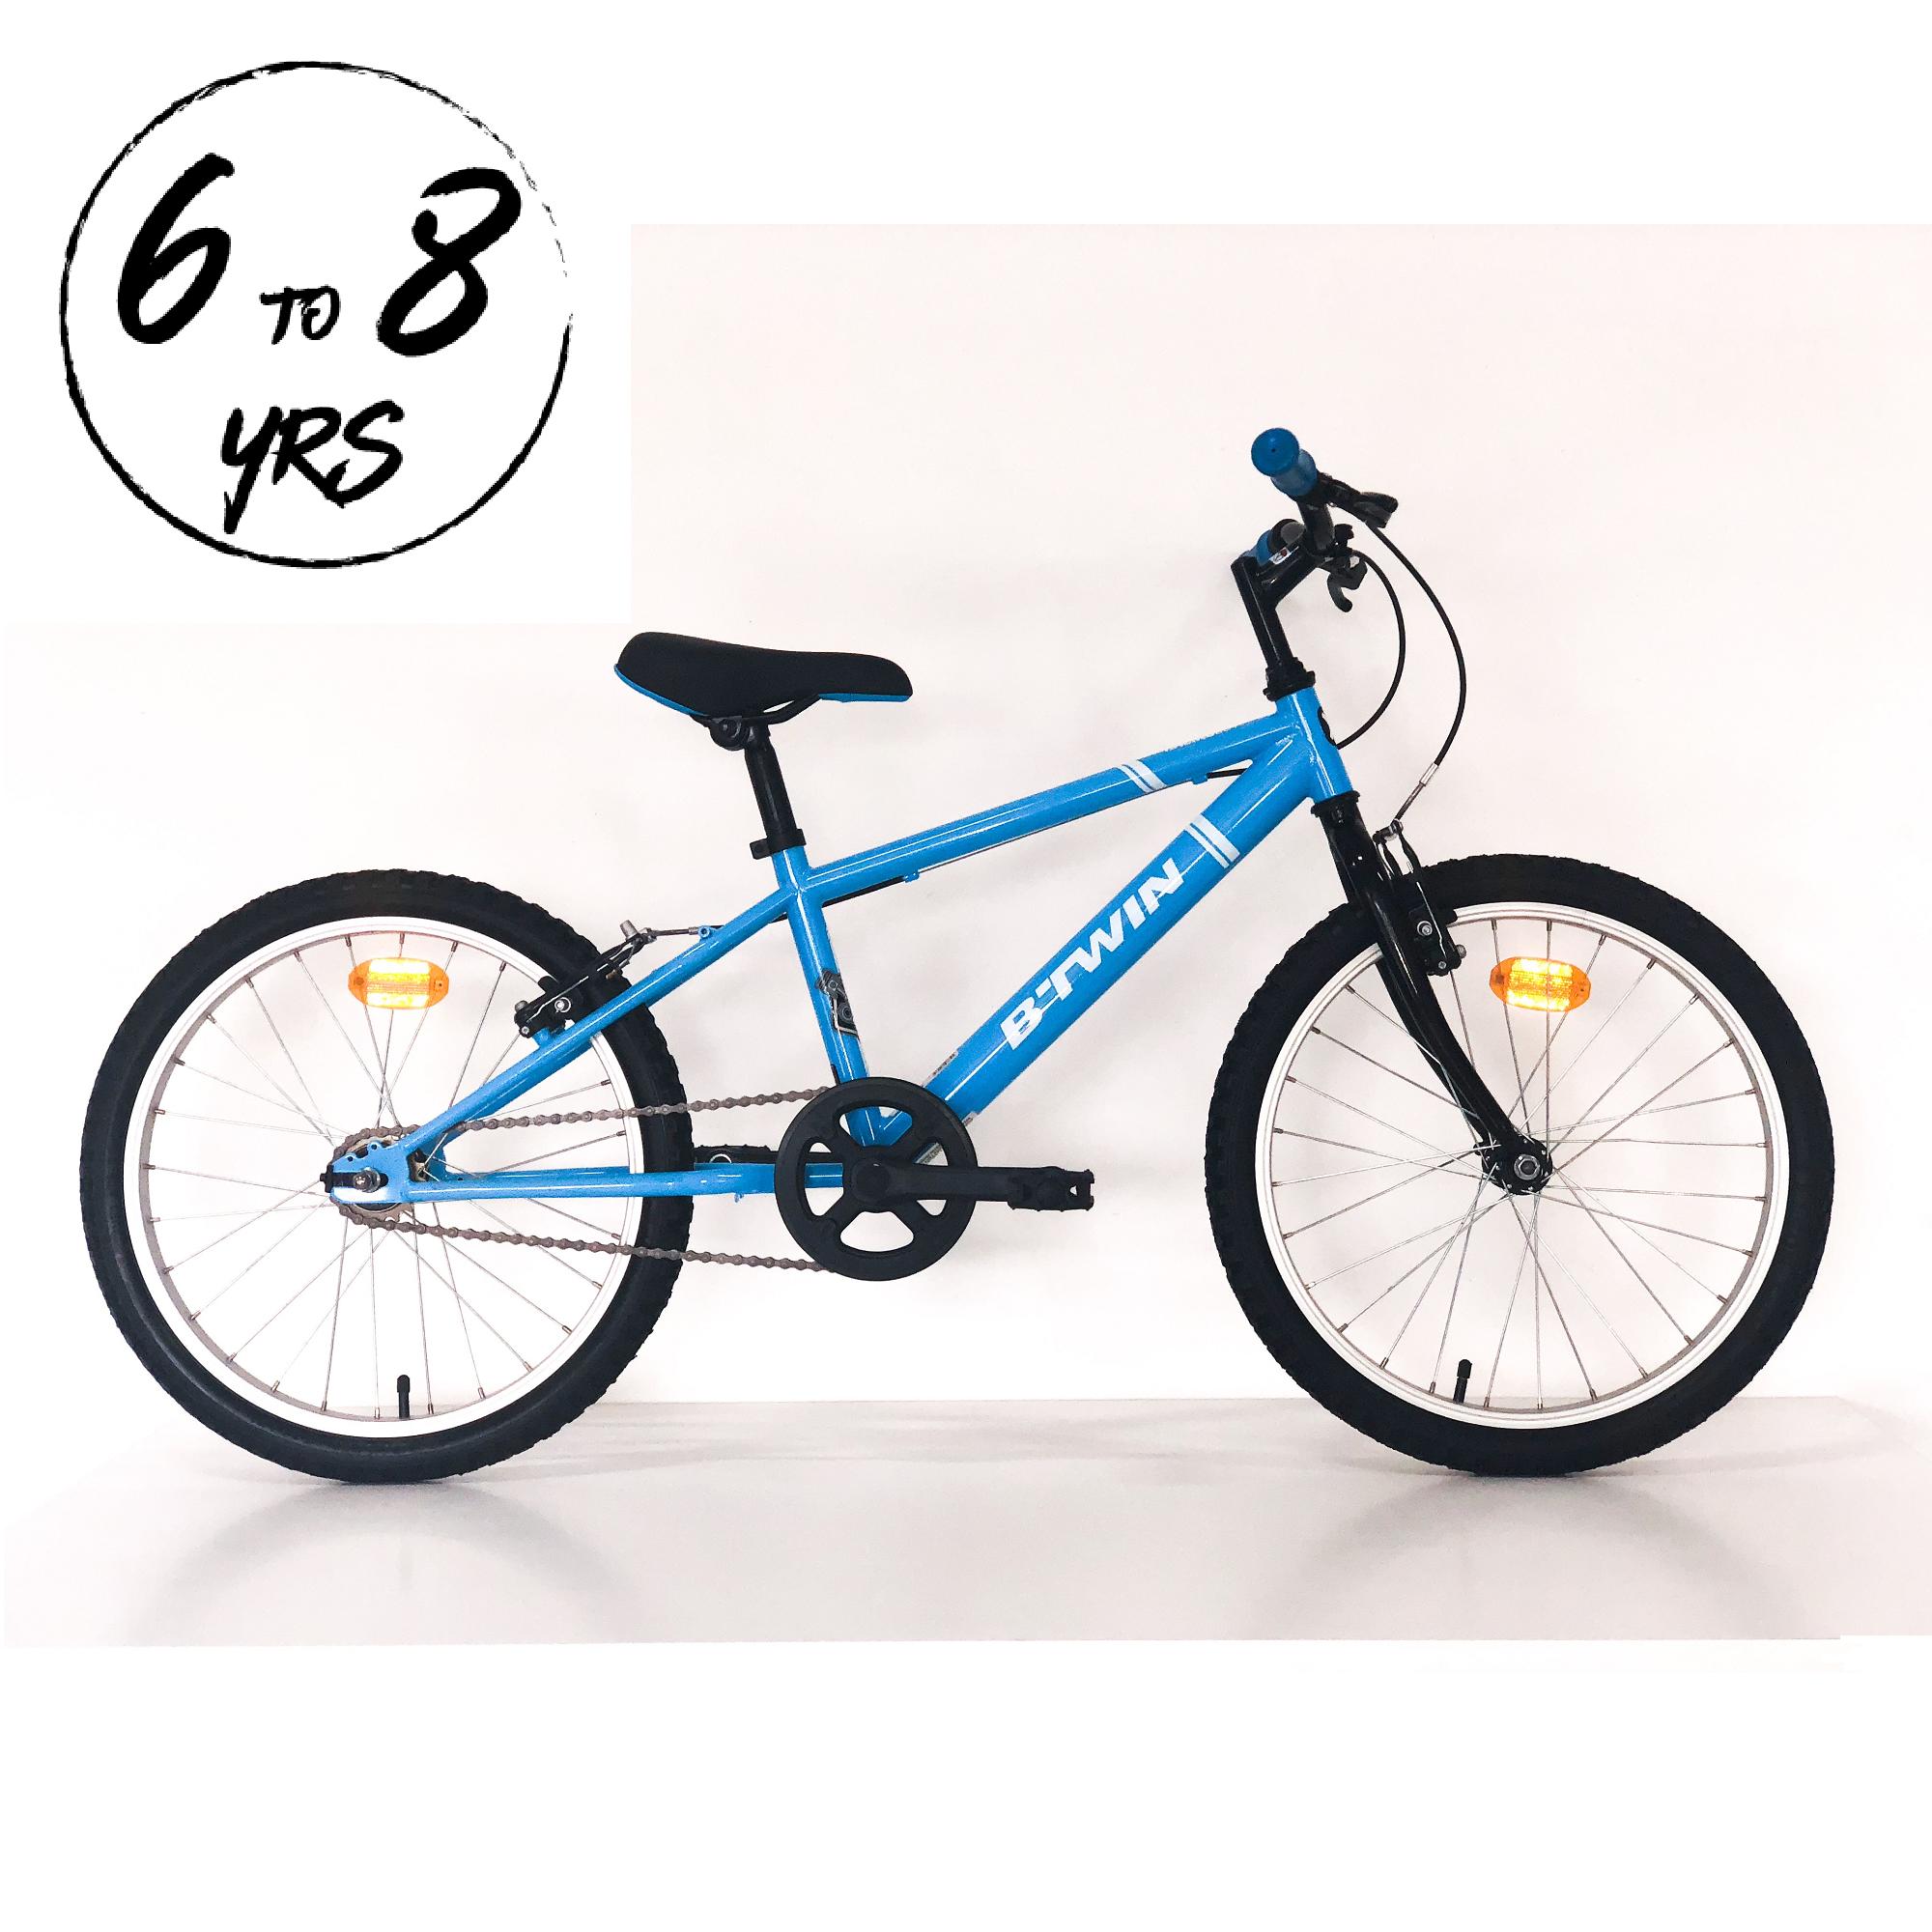 btwin cycle for 6 year old